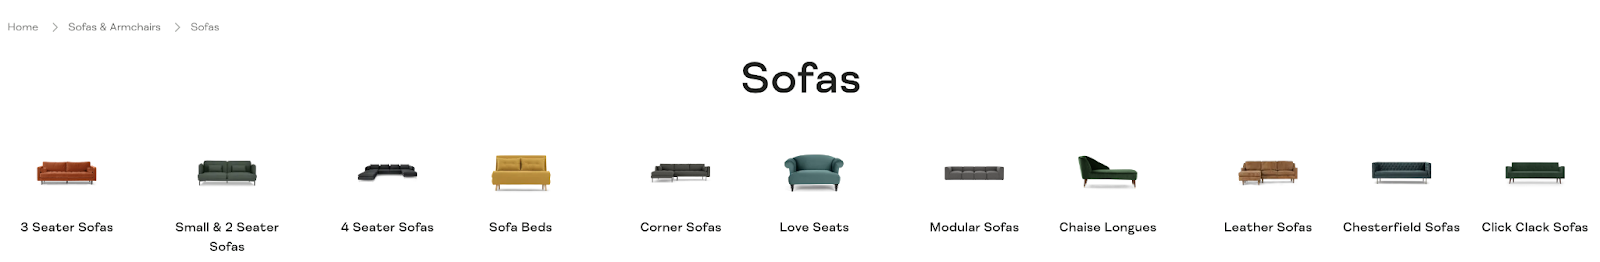 subcategory linking example on a website with multiple different sofa categories